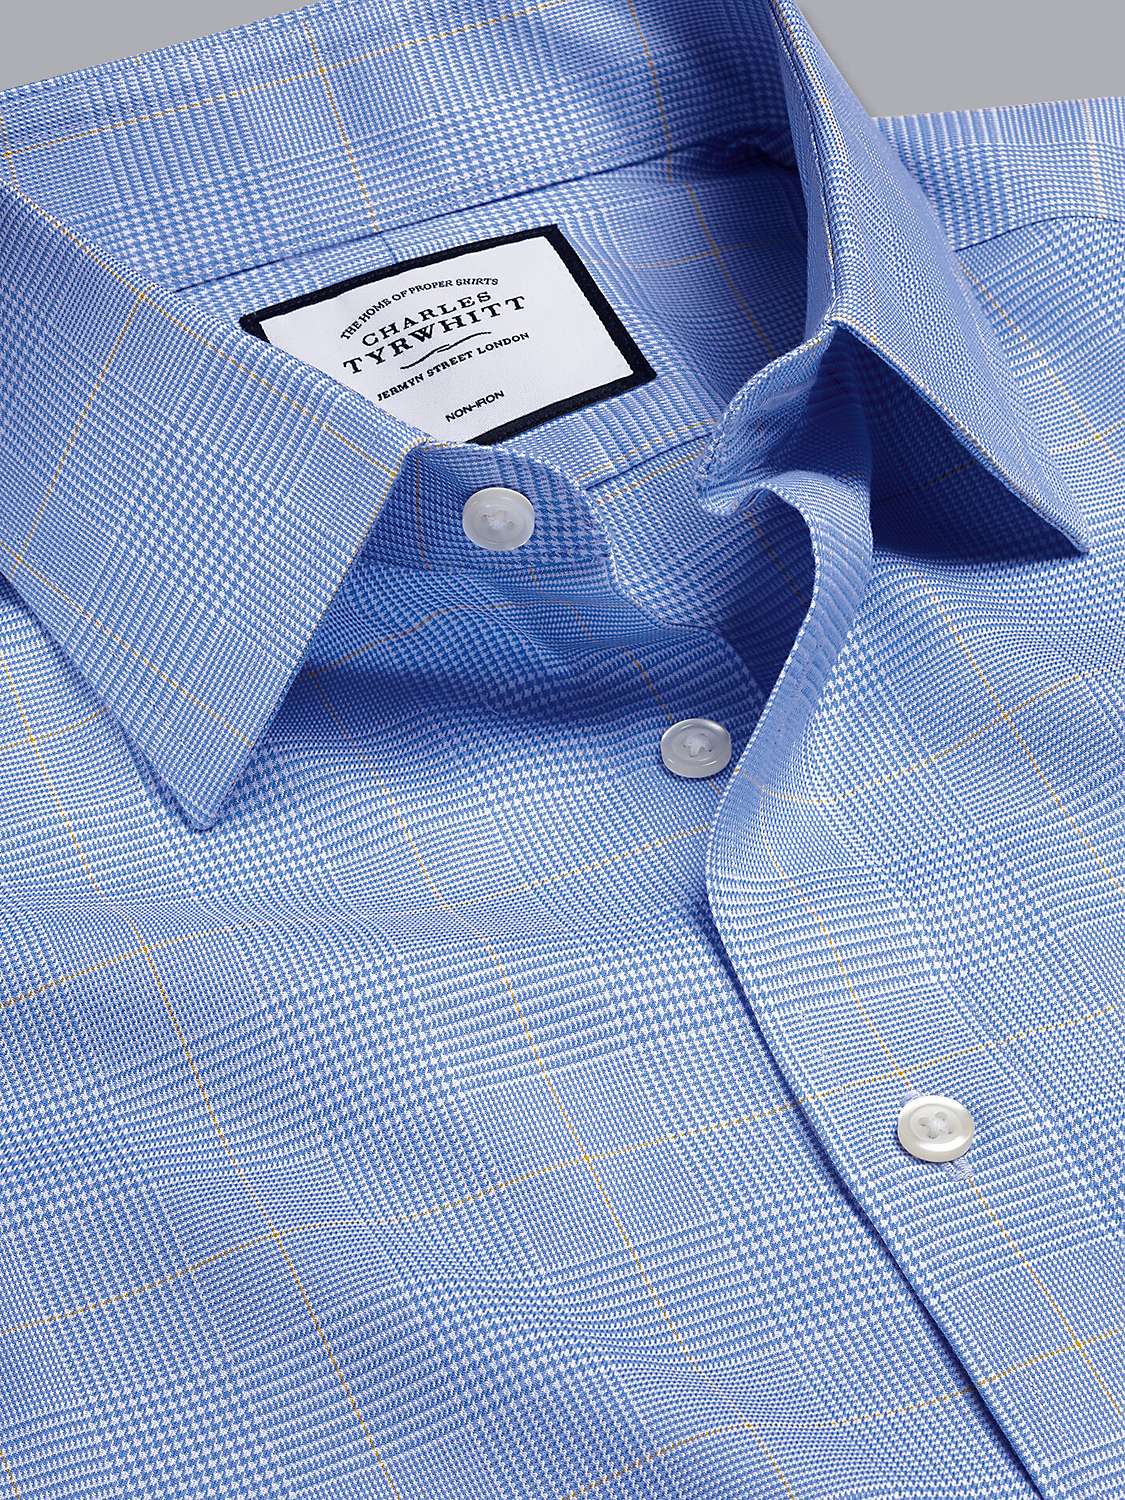 Buy Charles Tyrwhitt Non-Iron Prince of Wales Slim Fit Shirt, Ocean Blue Online at johnlewis.com